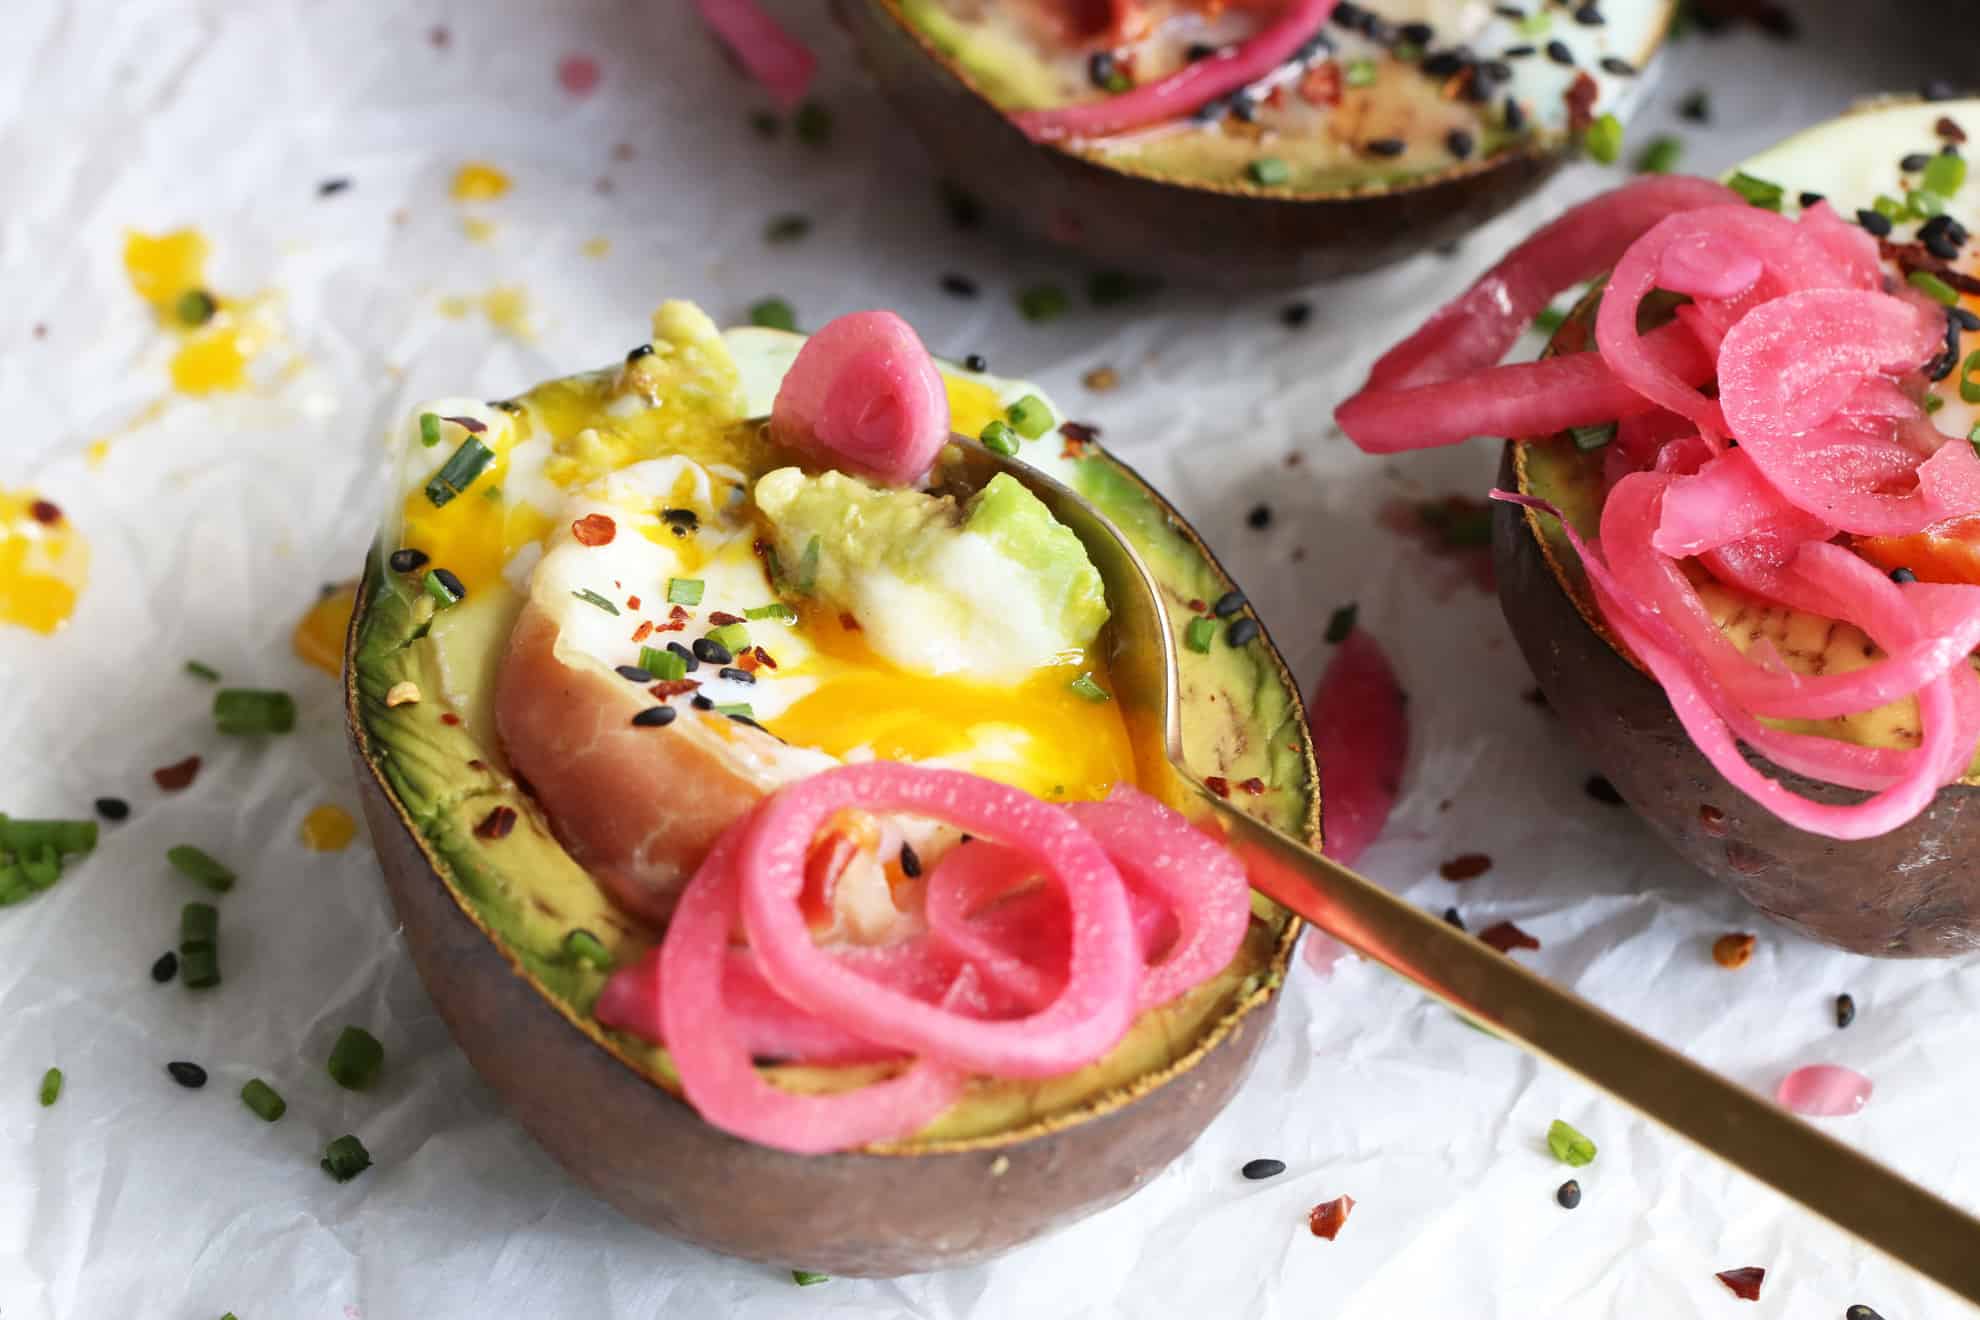 25 Mother's Day Brunch Recipes